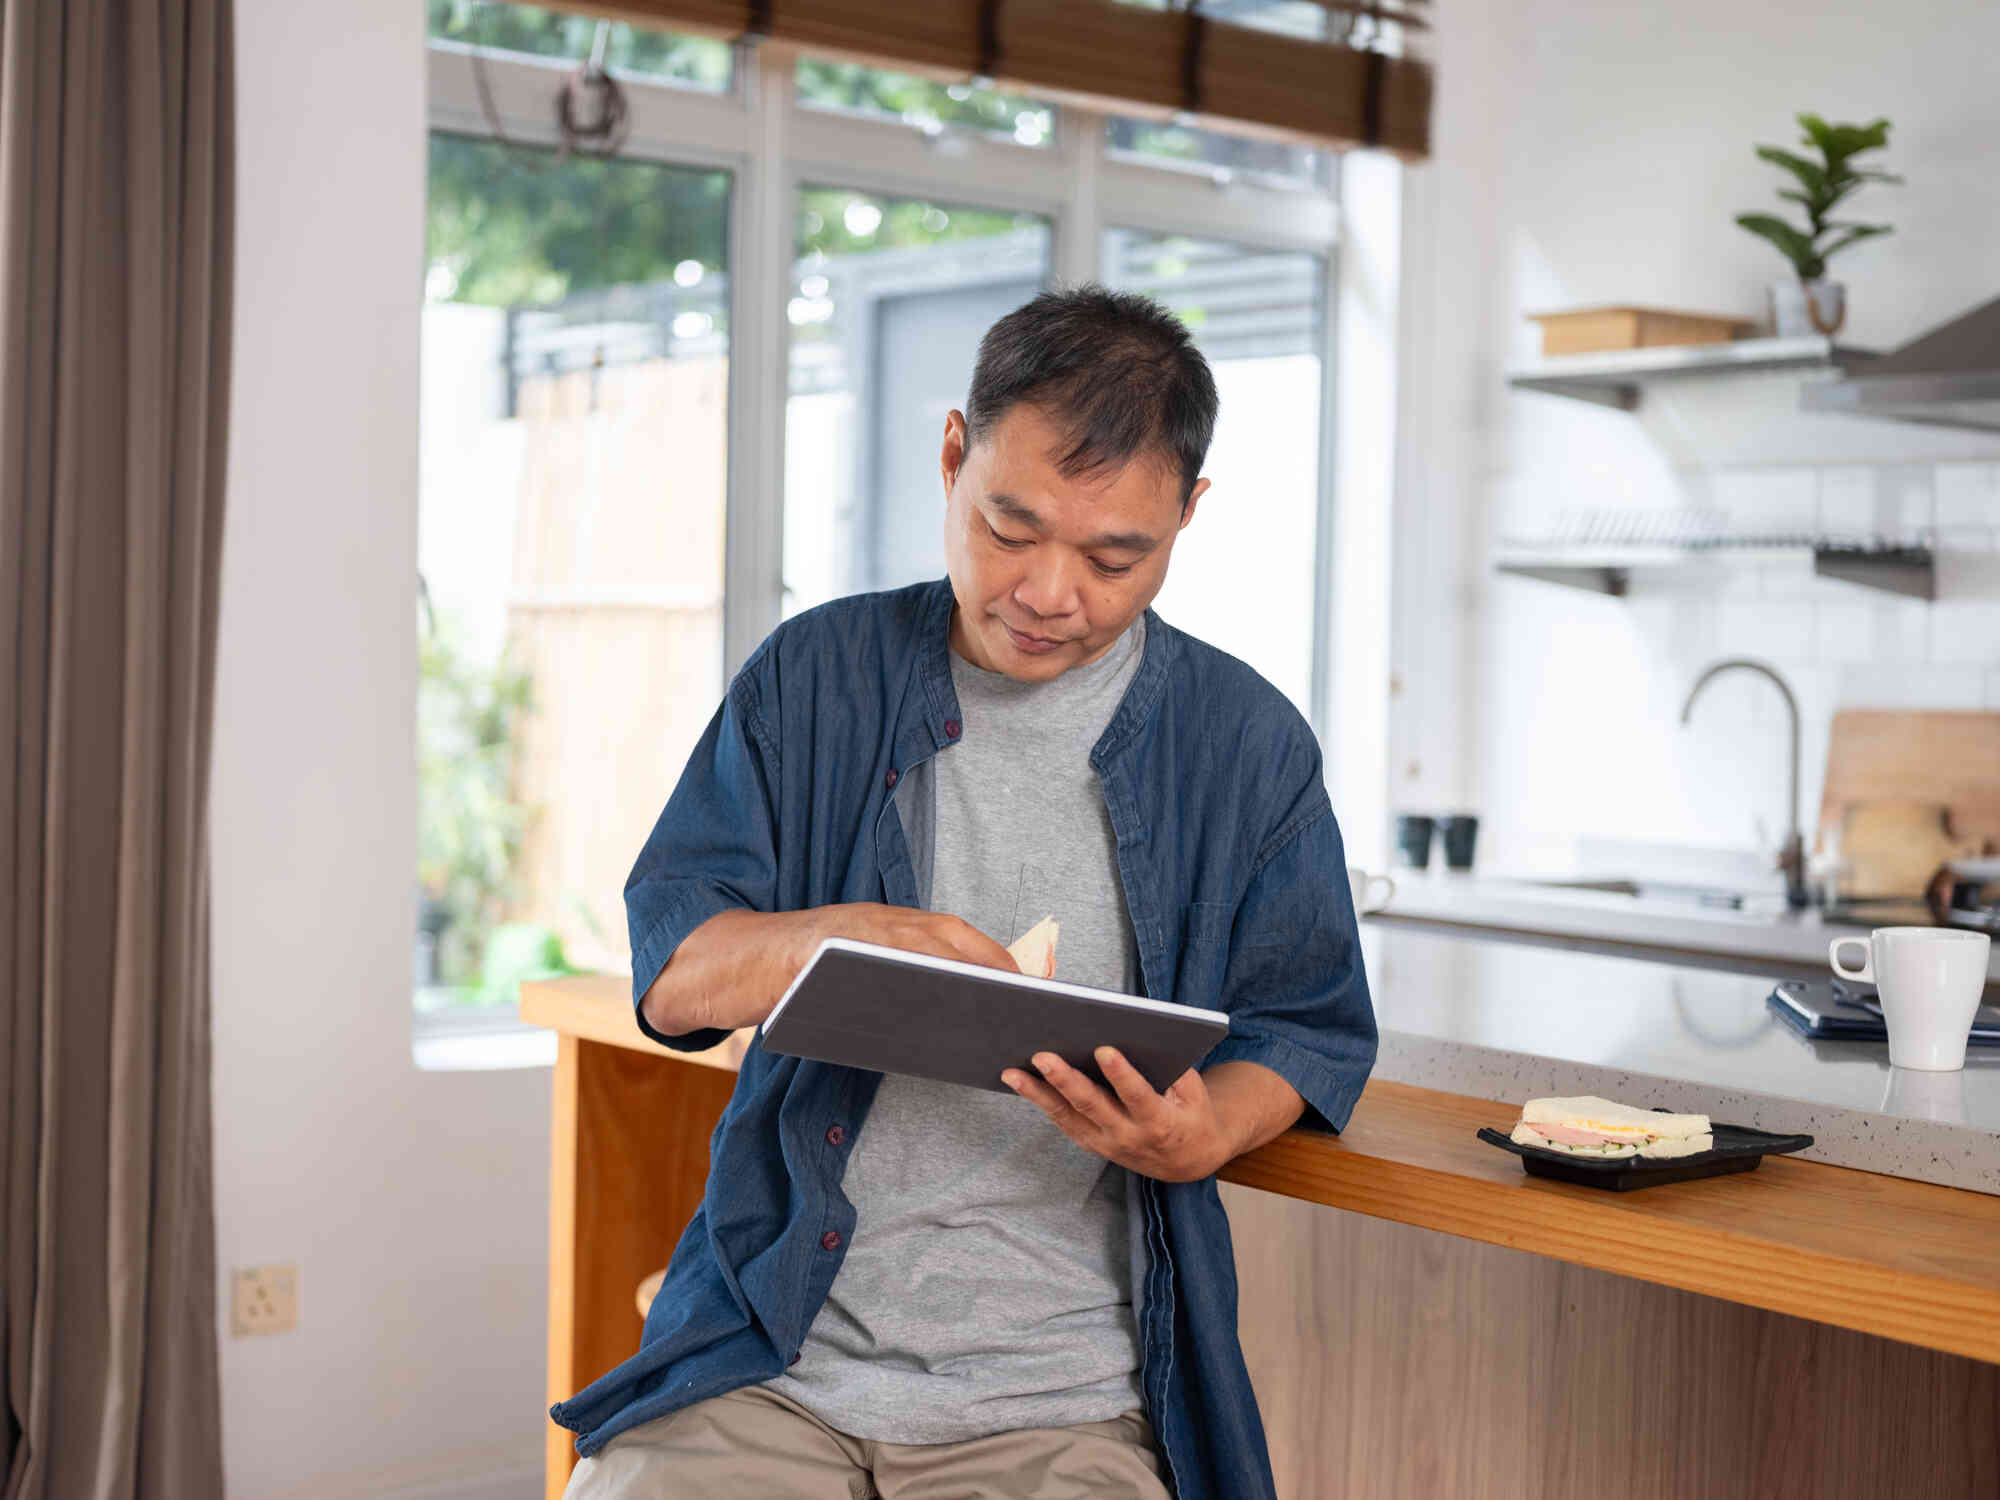 a middle aged man in a blue shirt stands in his kitchen and taps on the tablet in his hand with a serious expression.